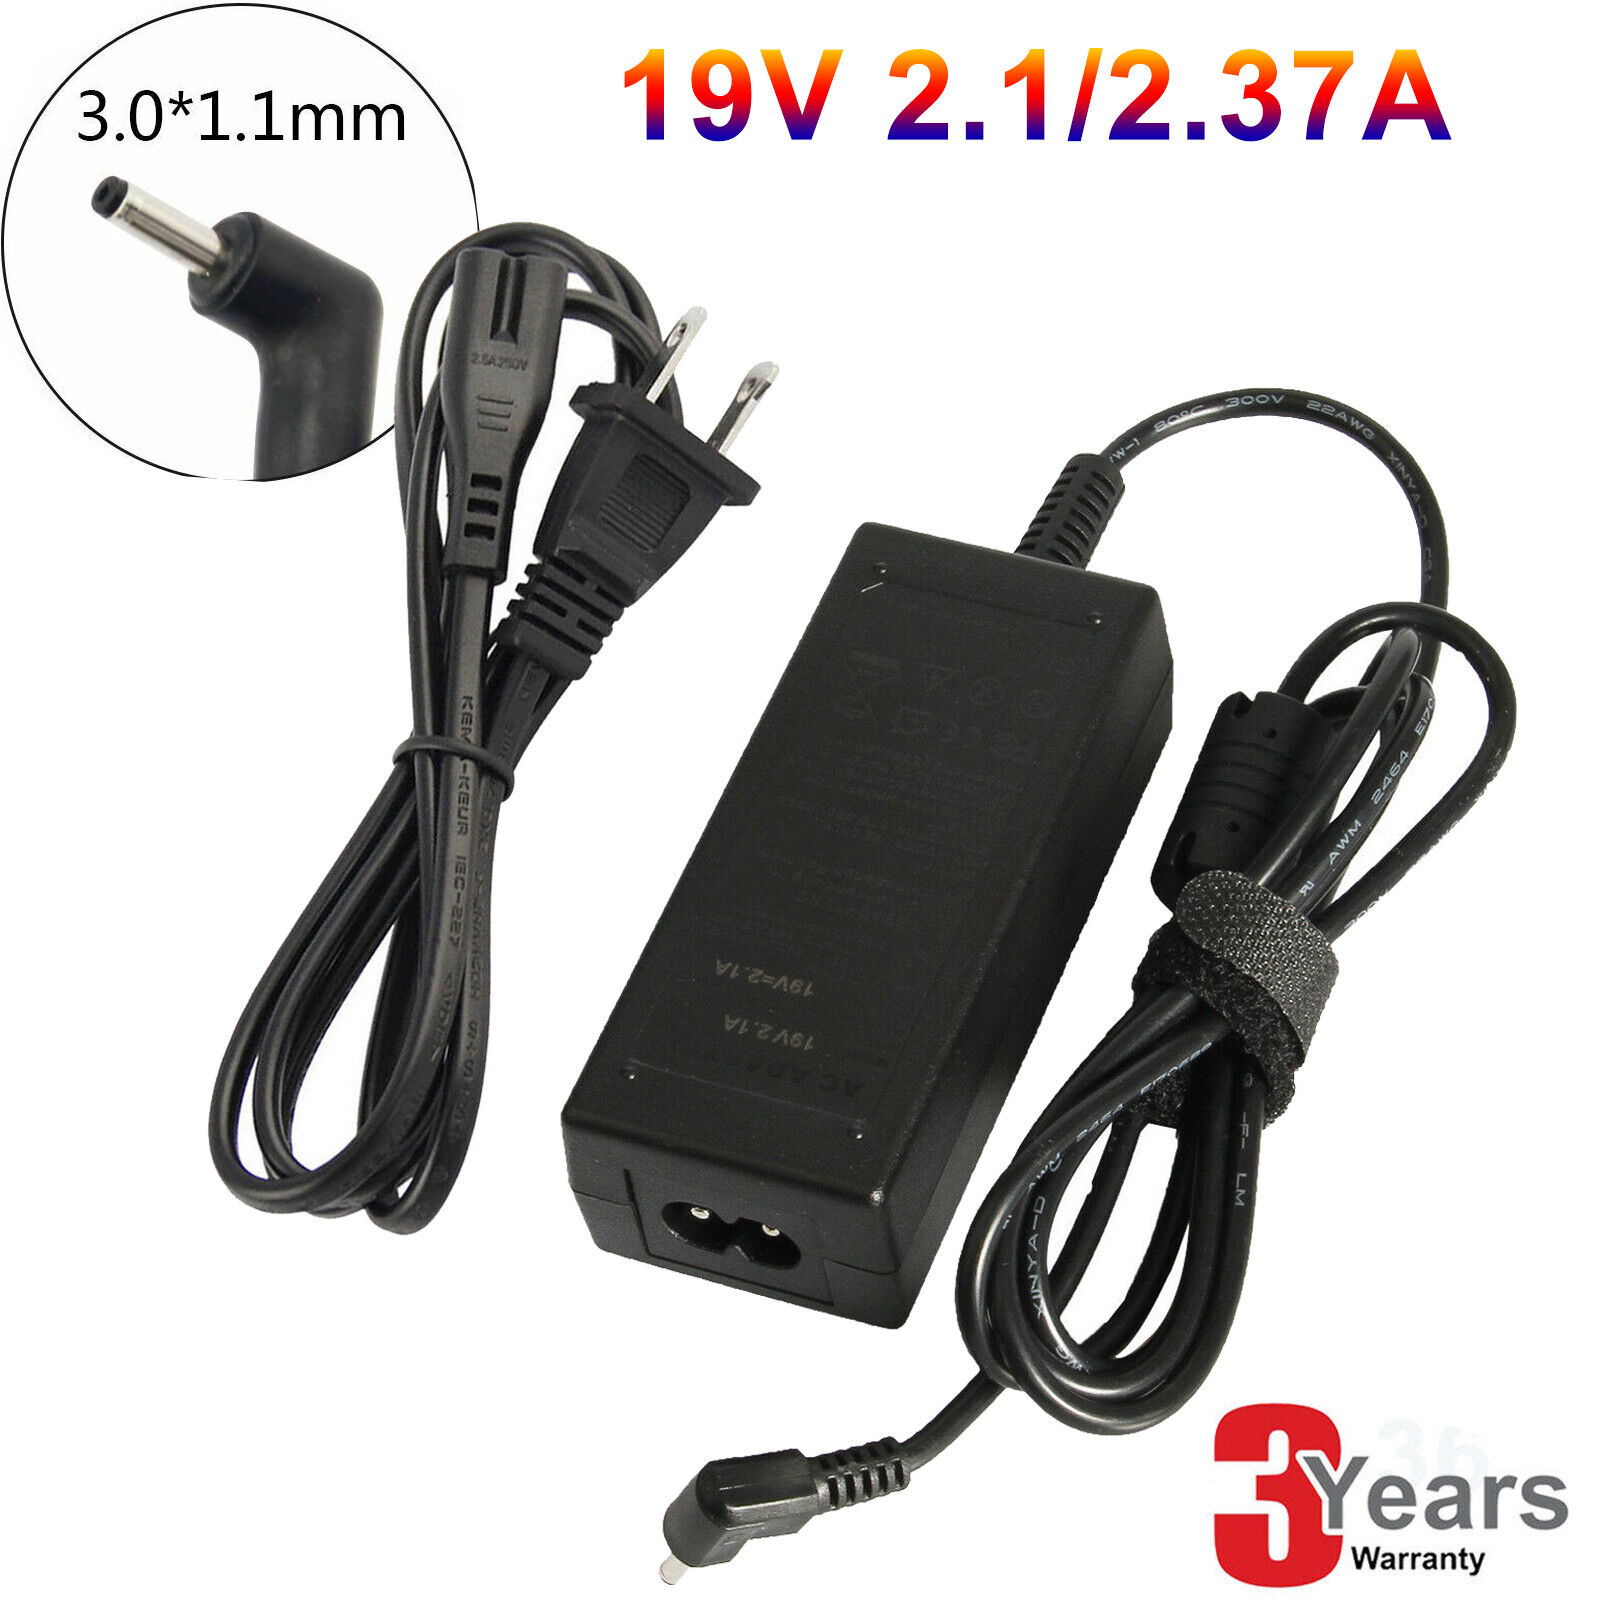 19V 2.1A 45W Laptop AC Power Adapter Charger For Acer Aspire 3.0*1.1mm